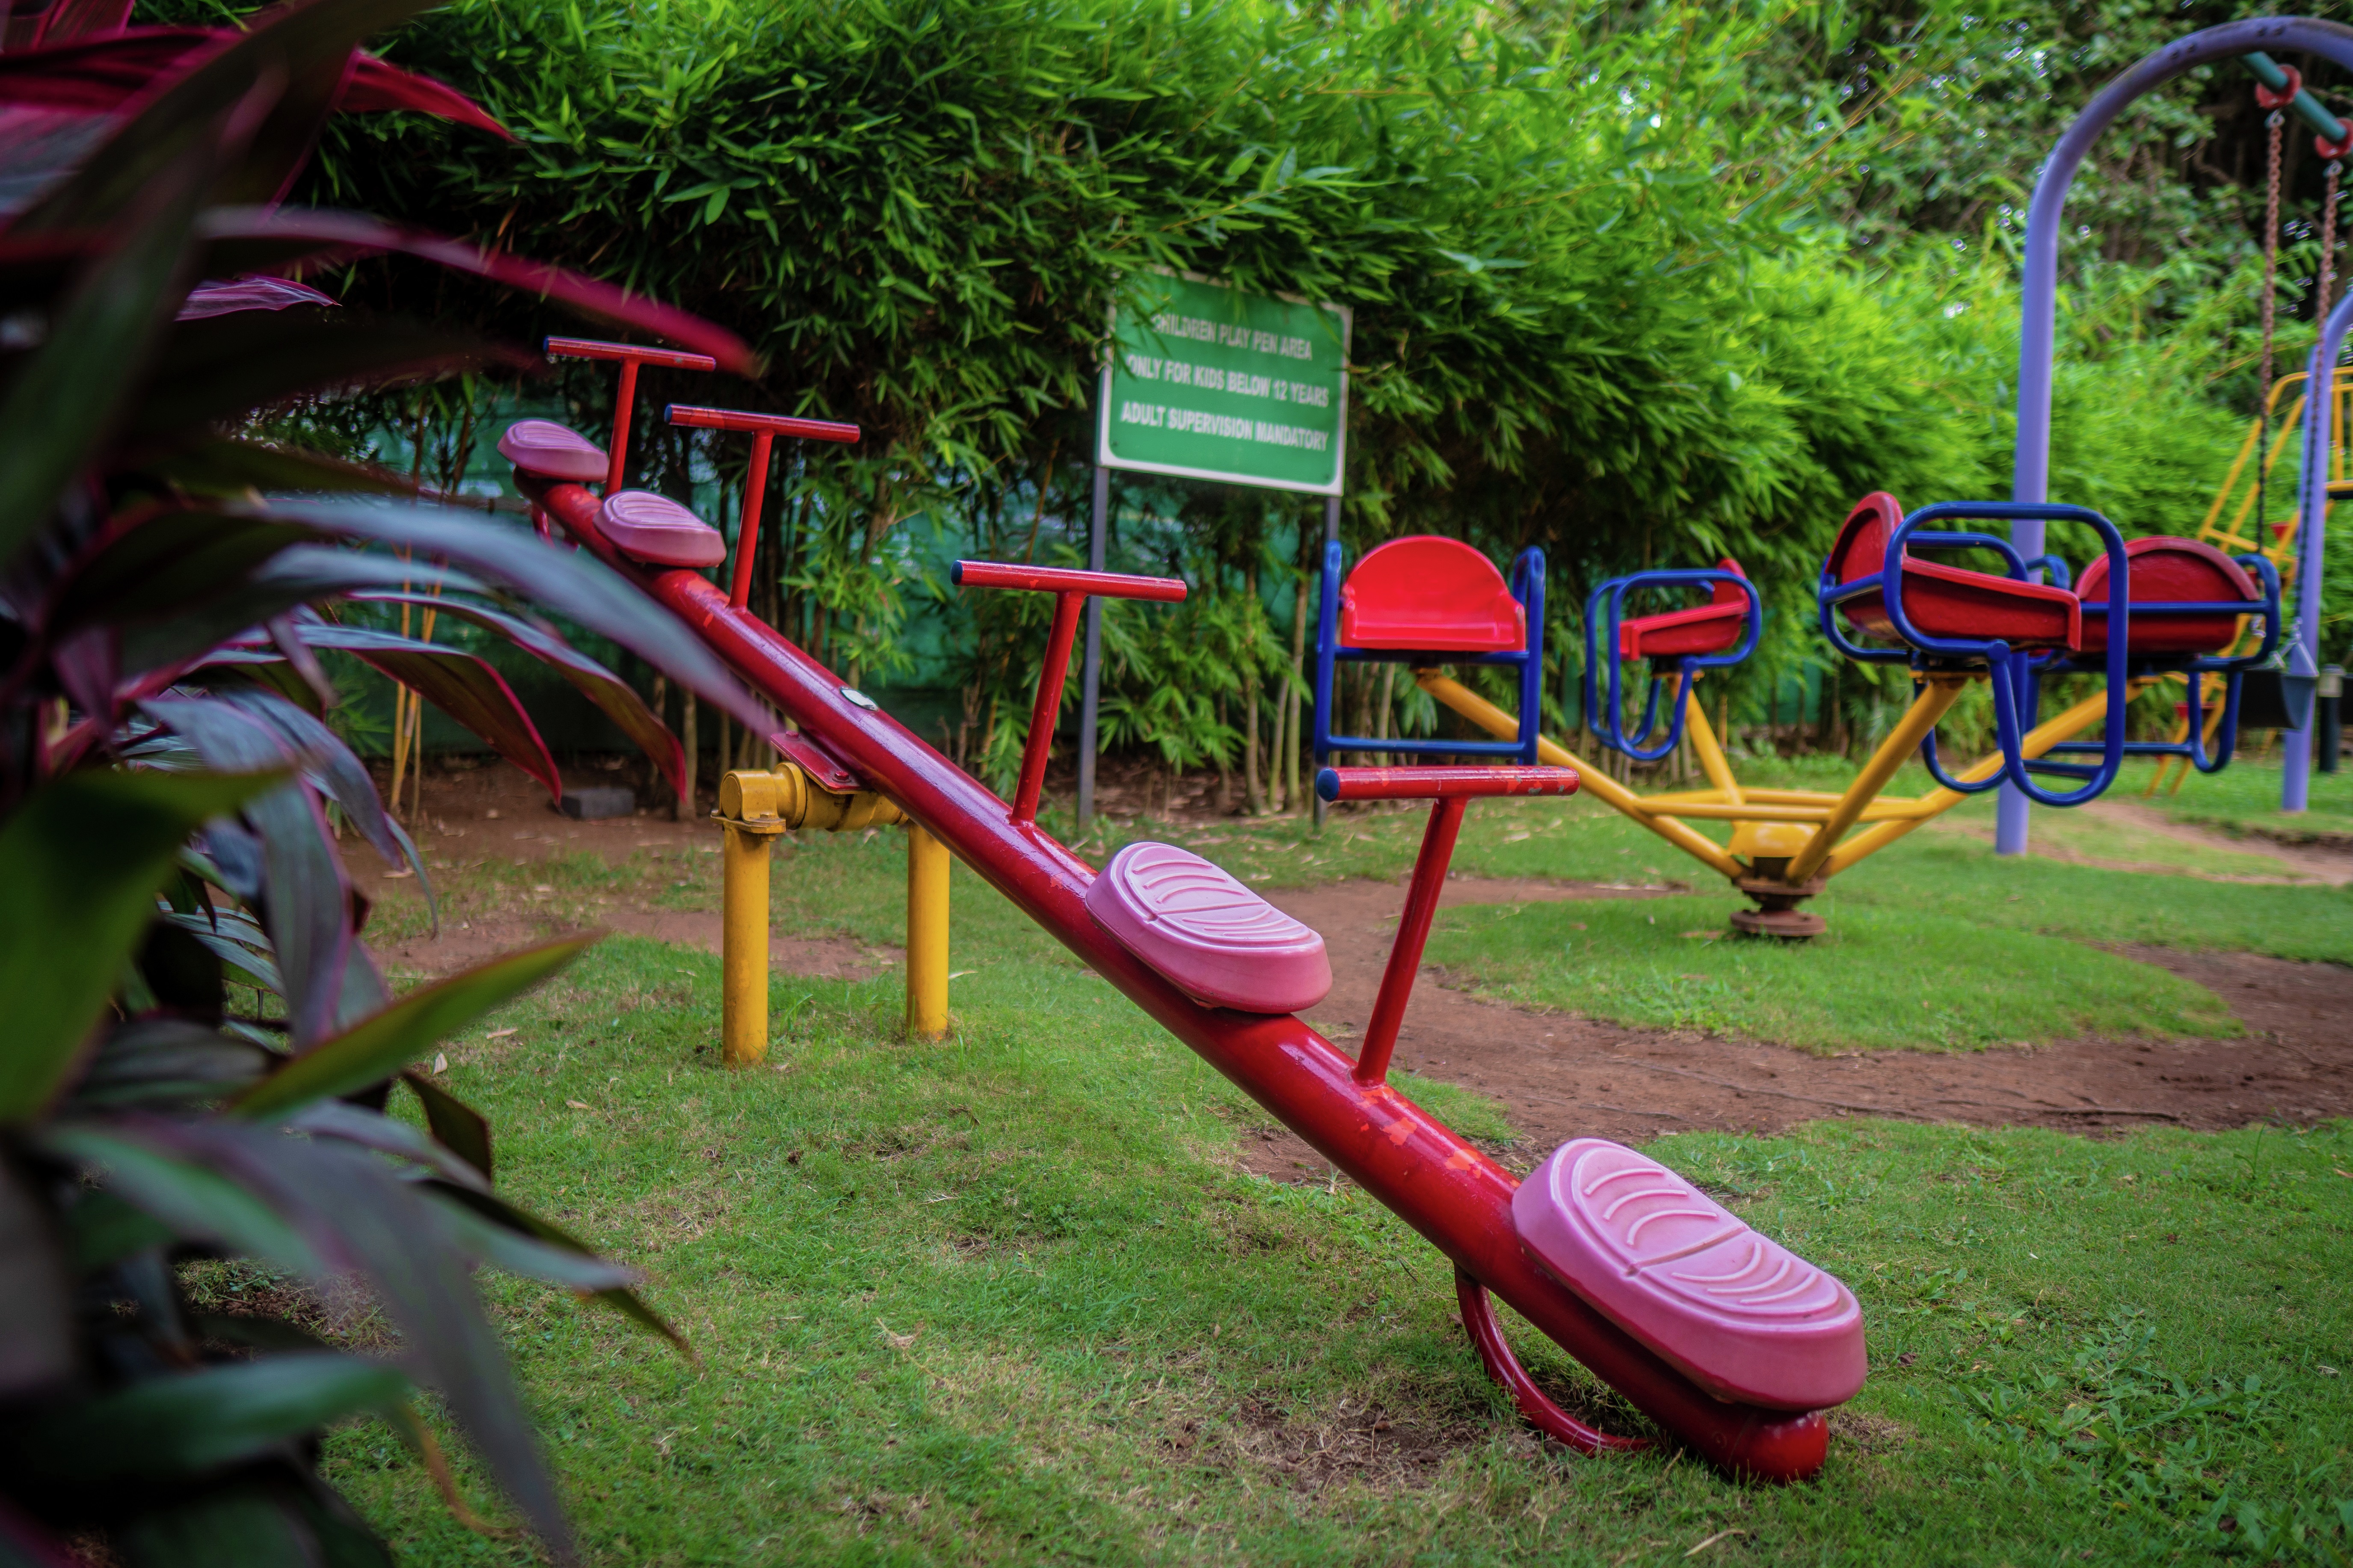 playground equipment on a grassy lawn